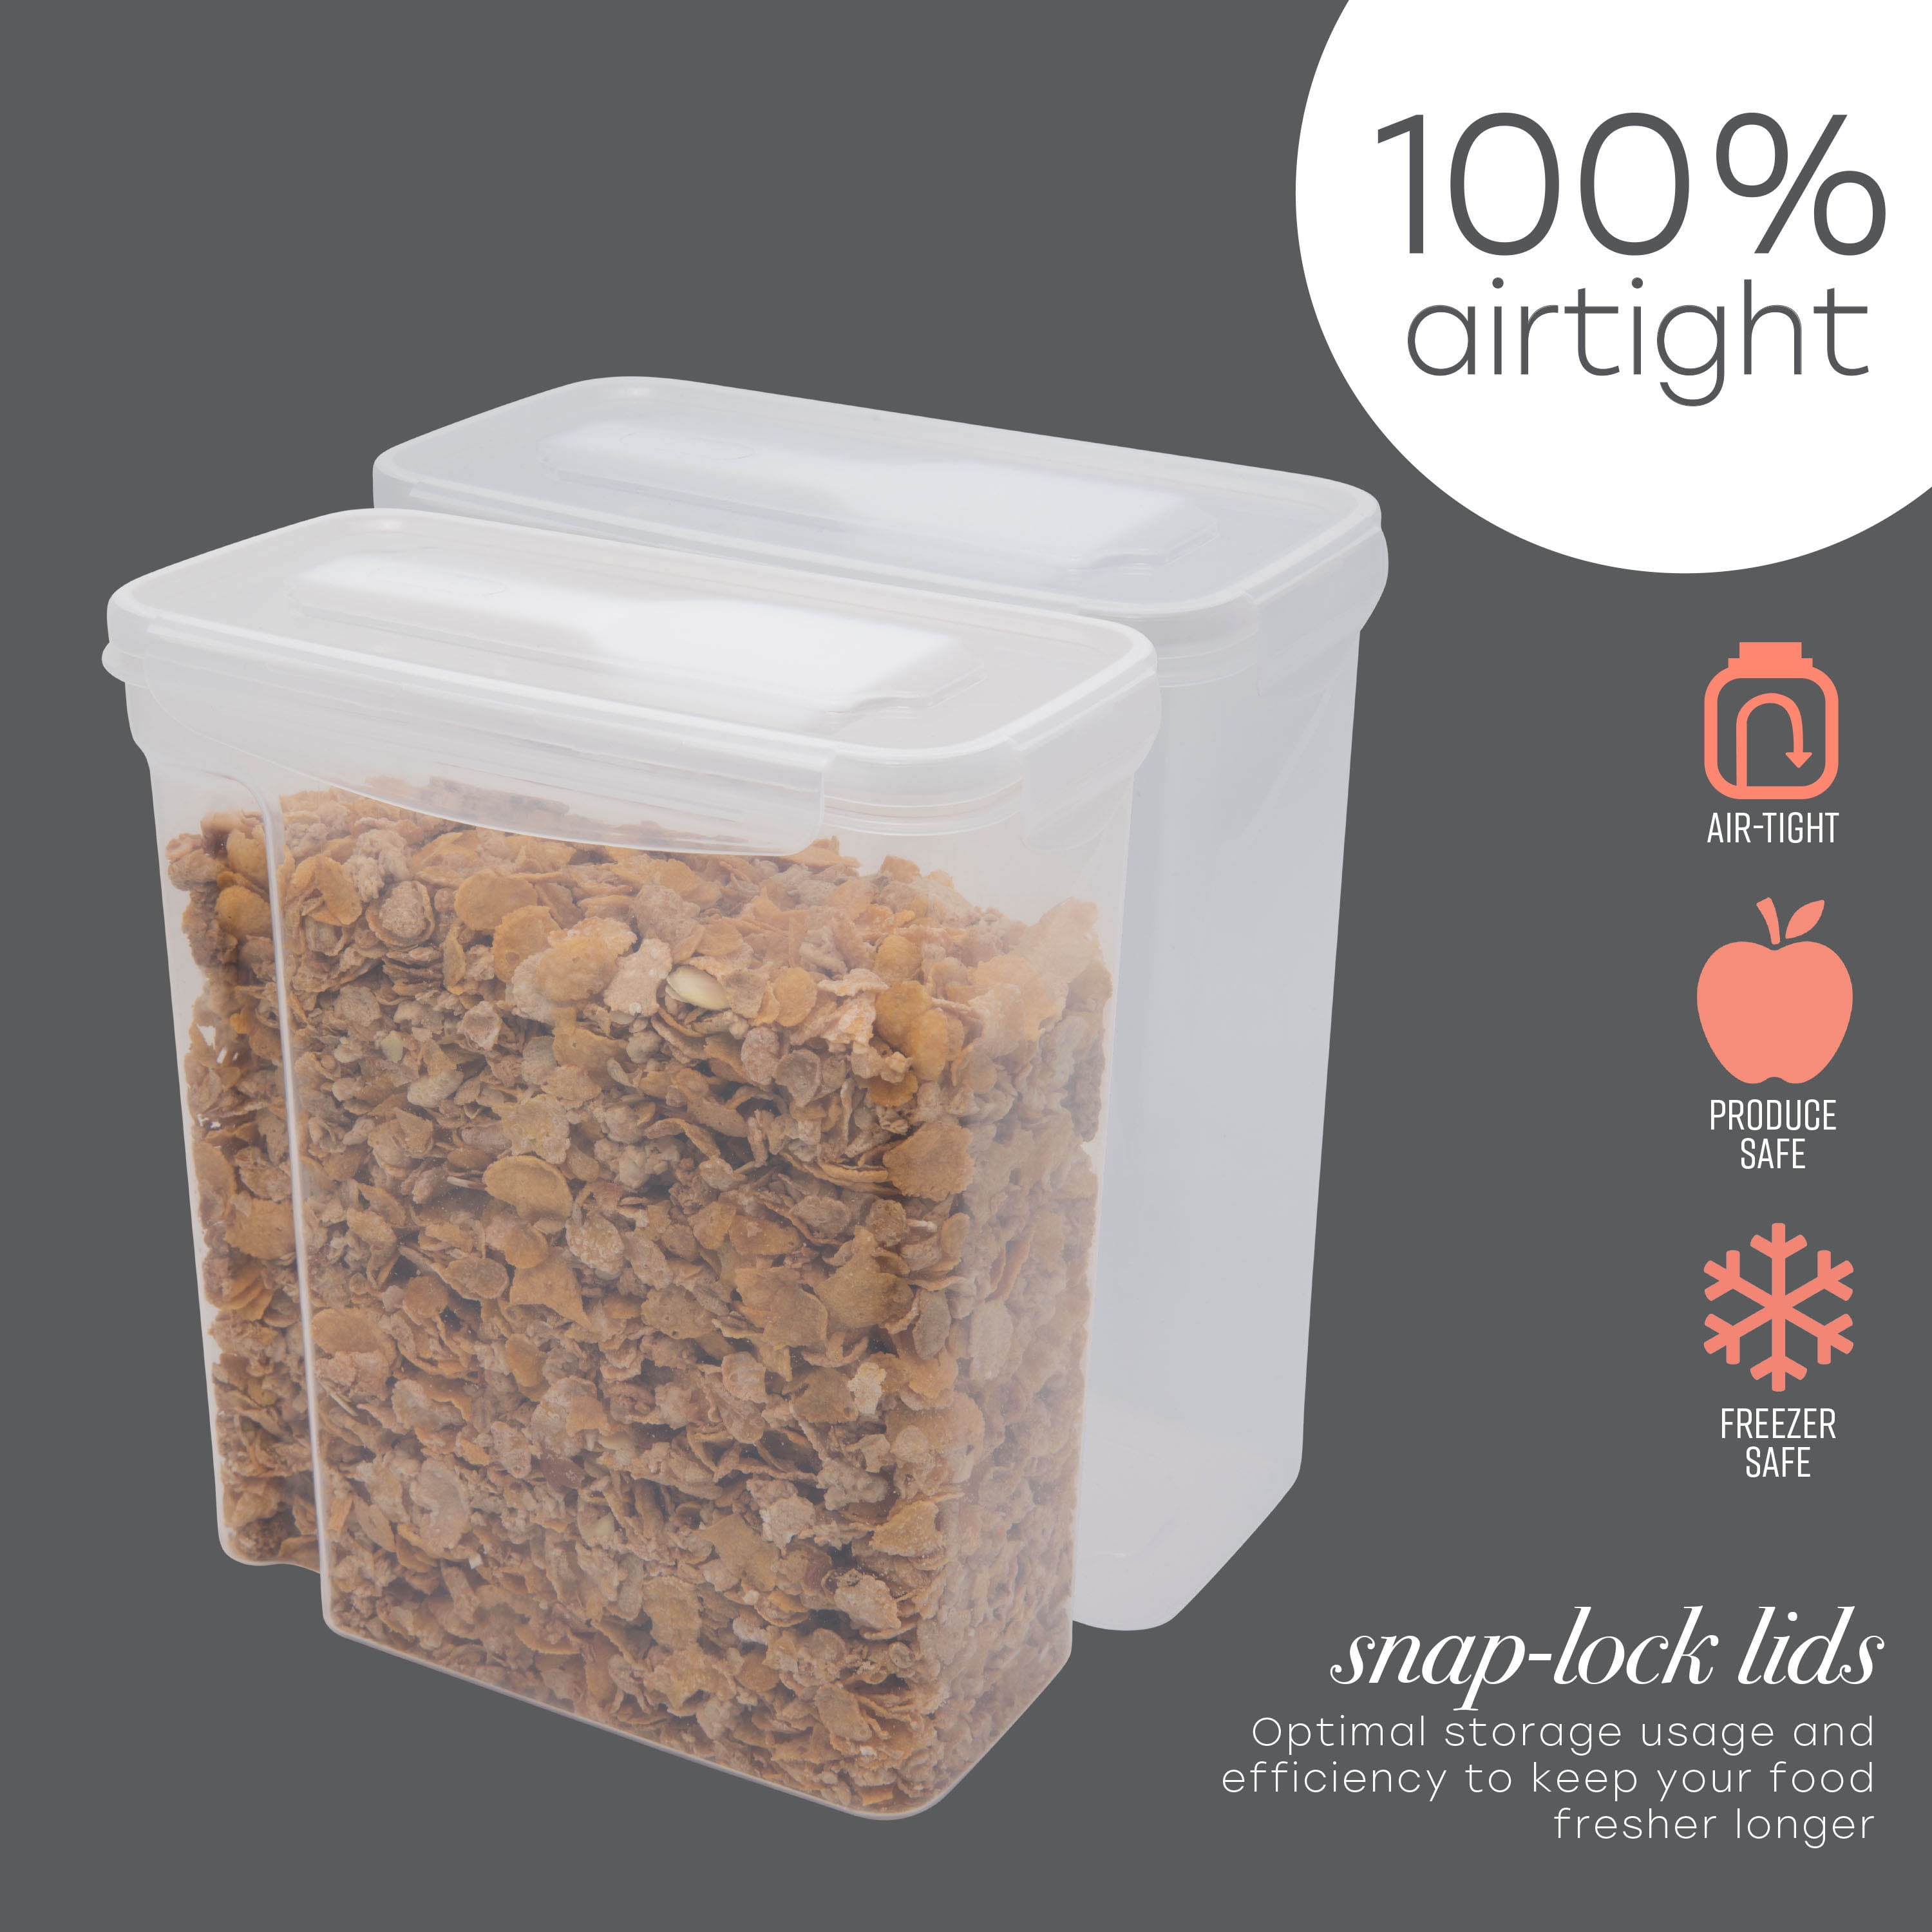 Thickened Insect Proof Food Storage Set In With Grains, Cereals, And More  Portable And Moisture Resistant Container Nozzles 230817 From Kuo10, $10.37